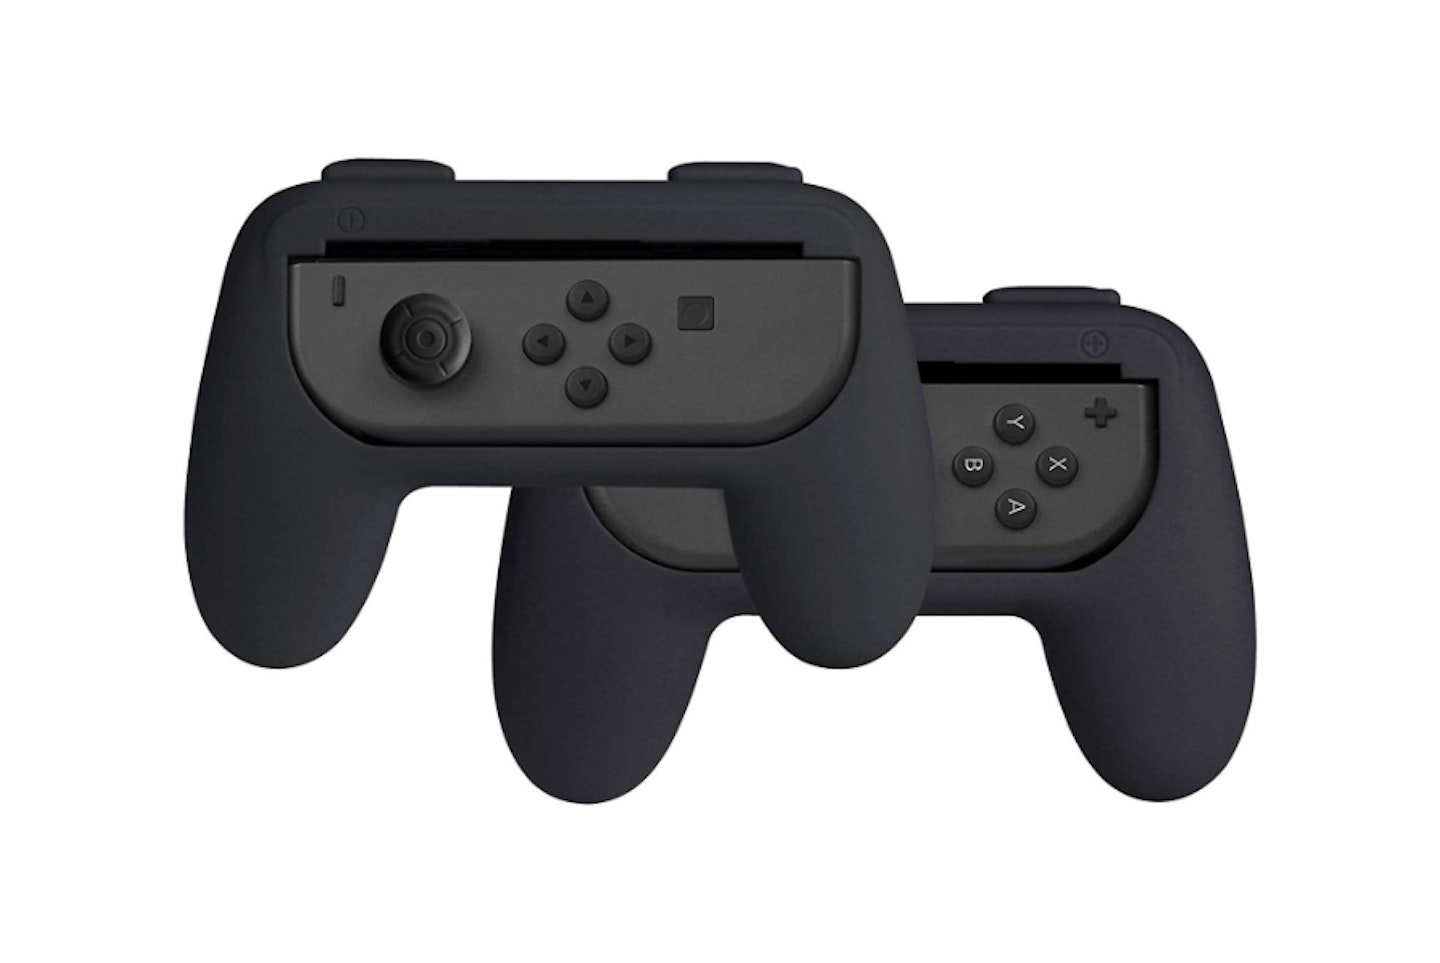 Grip Kit for Nintendo Switch Joy-Con Controllers – Black, WAS £12.99 NOW £9.74